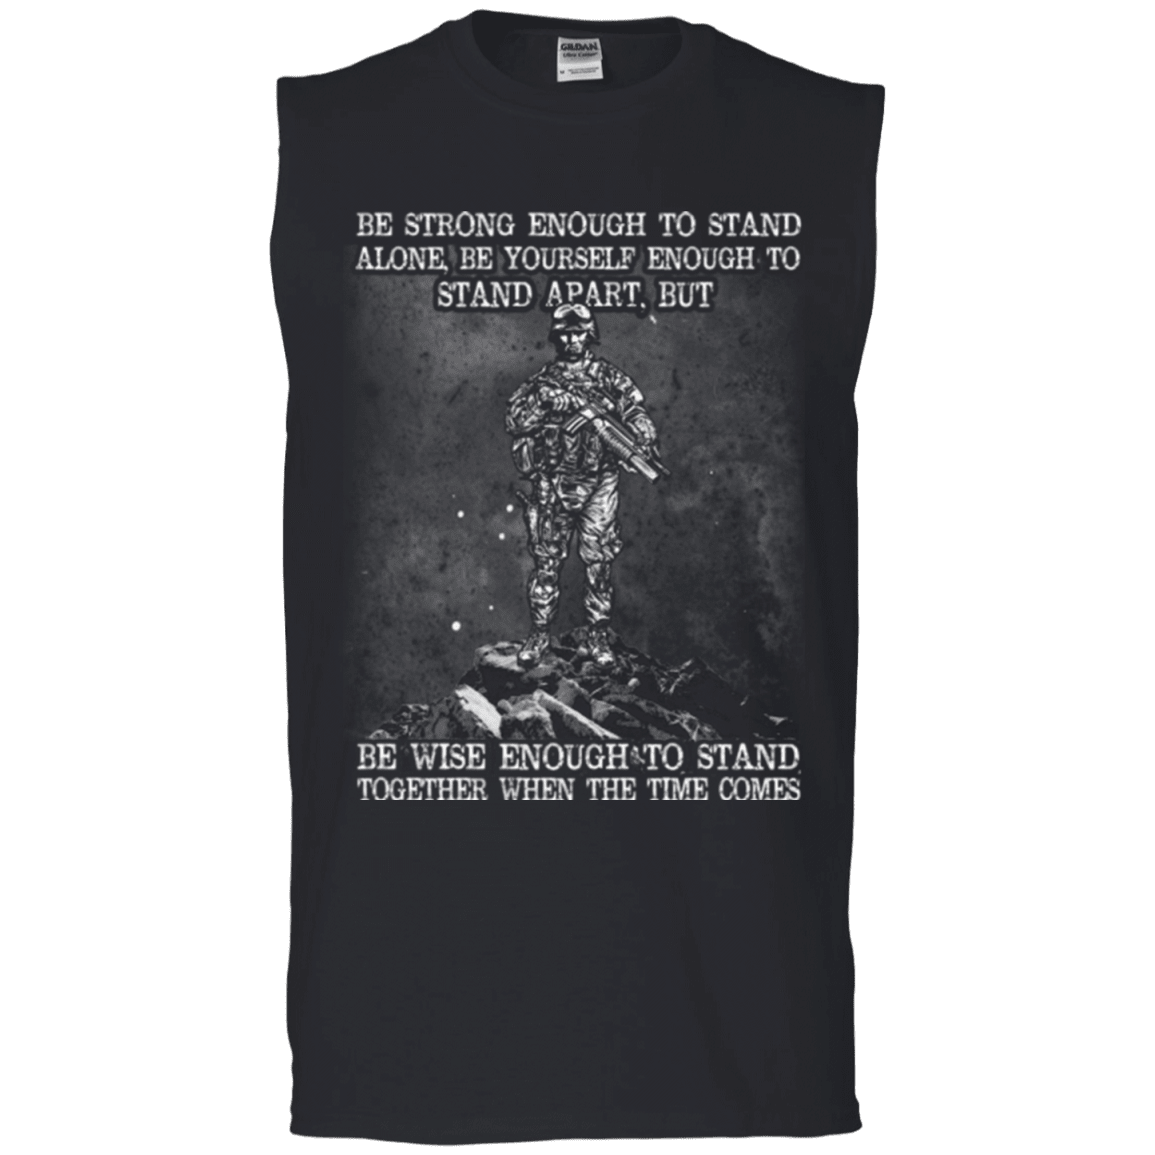 Military T-Shirt "STRONG ENOUGH TO STAND TOGETHER"-TShirt-General-Veterans Nation